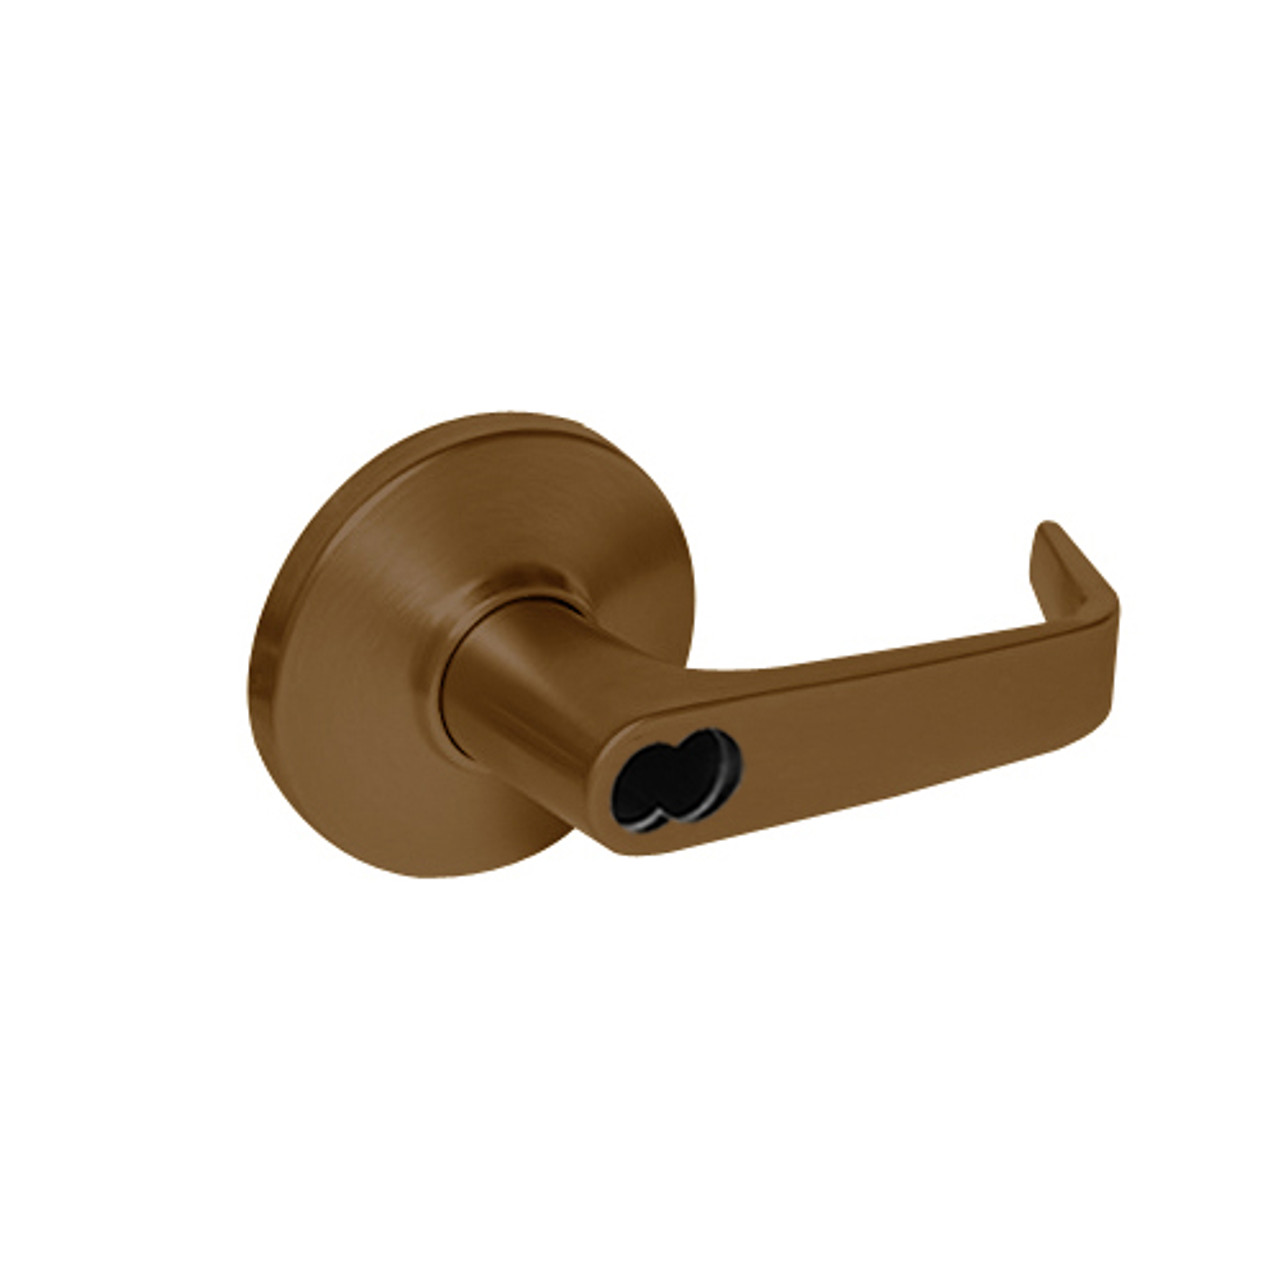 9K47T15DSTK690 Best 9K Series Dormitory Cylindrical Lever Locks with Contour Angle with Return Lever Design Accept 7 Pin Best Core in Dark Bronze